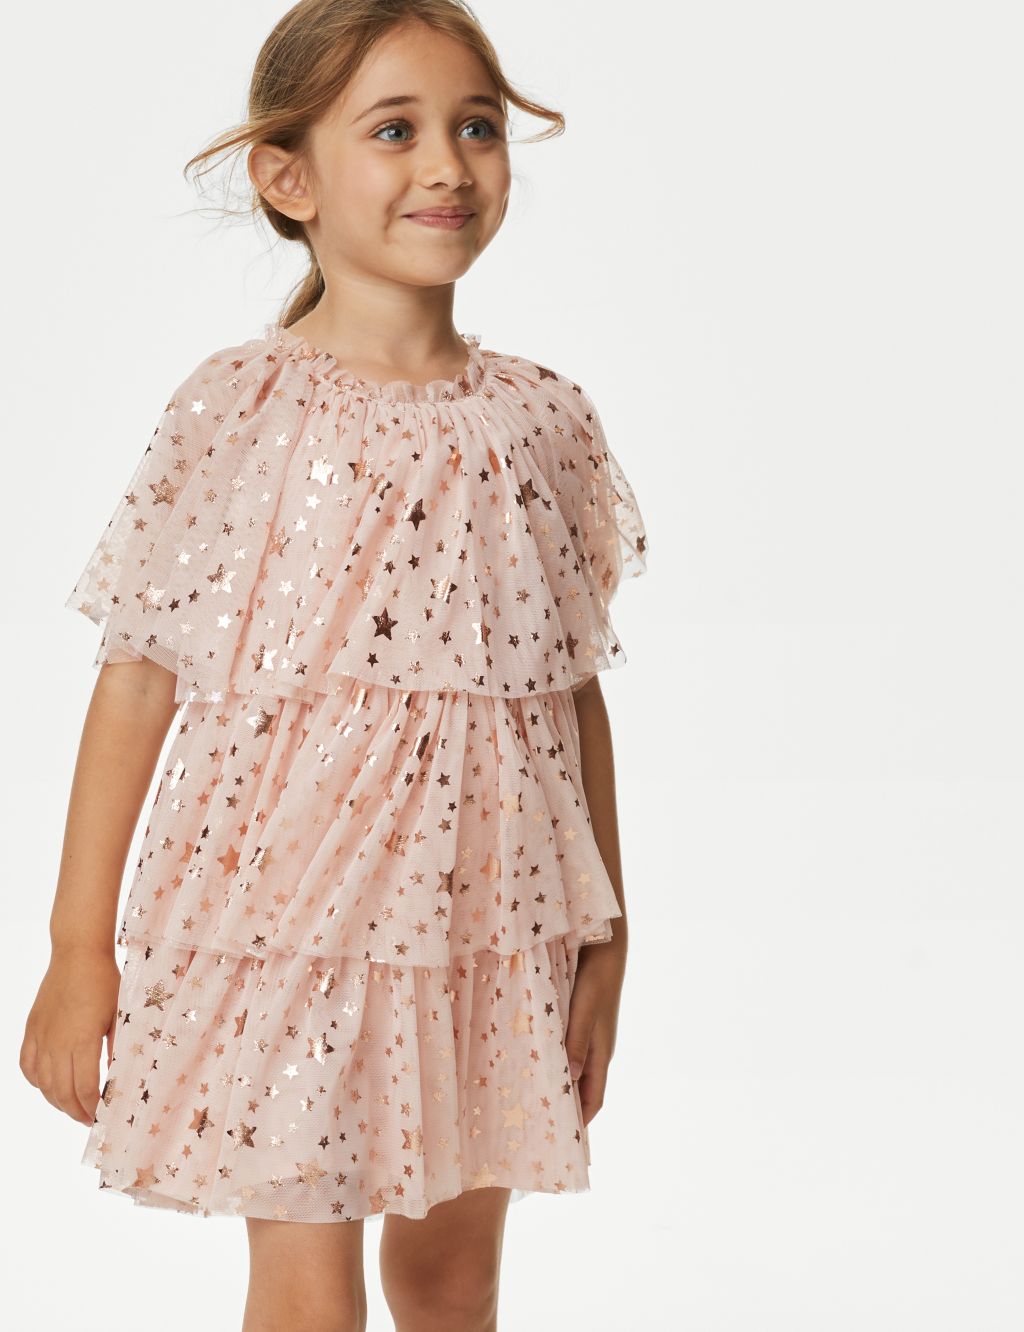 Tulle Star Print Tiered Party Dress (2-8 Yrs) image 1